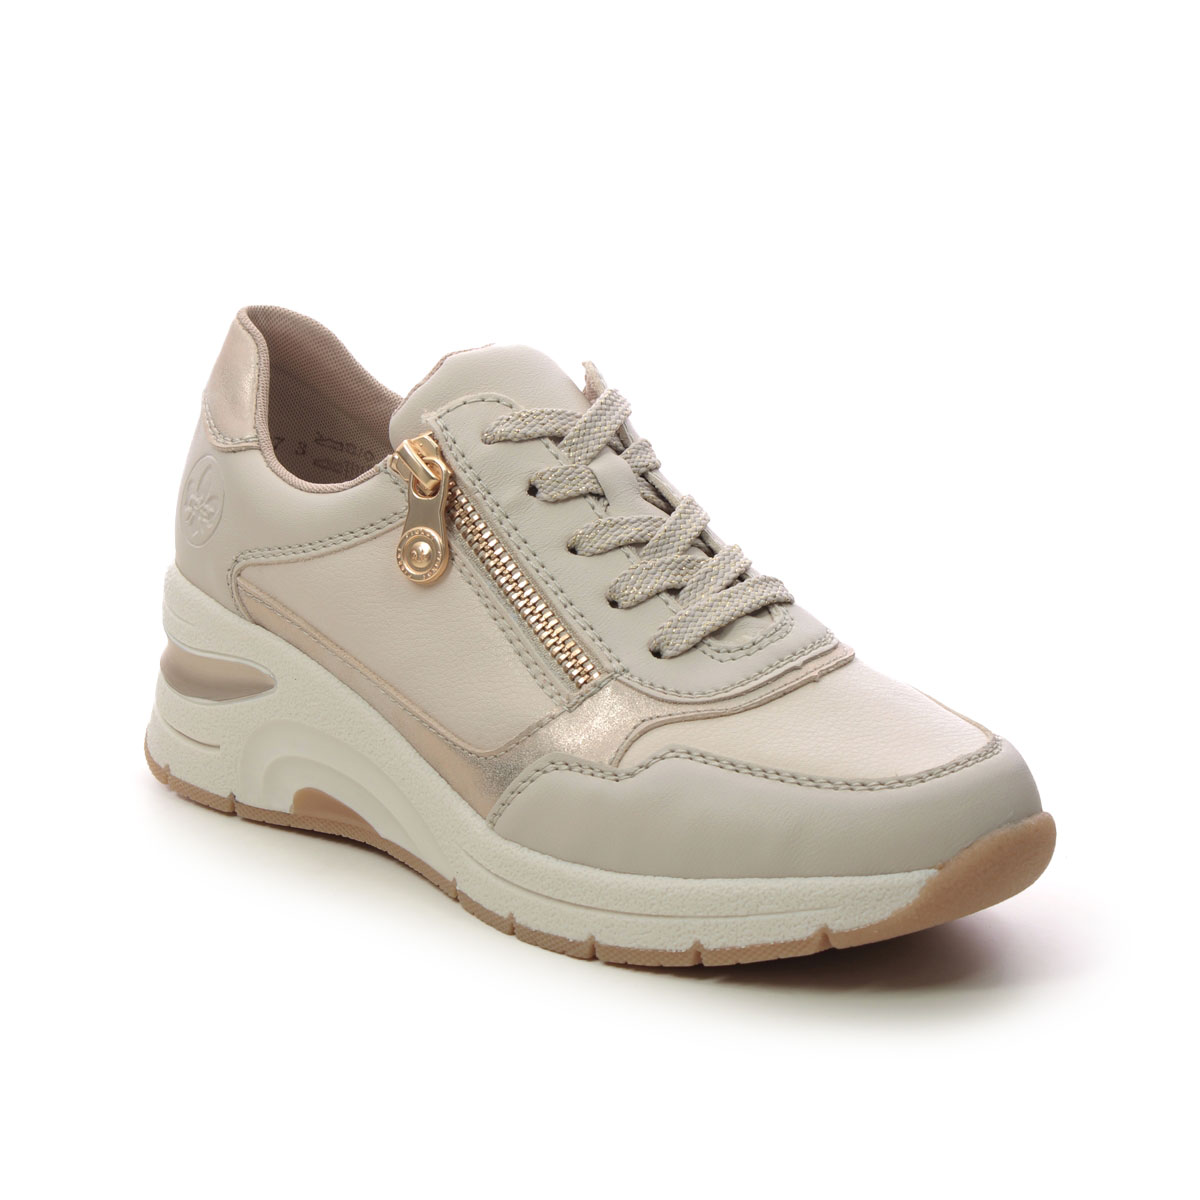 Rieker N9301-60 Beige Light Gold Womens trainers in a Plain Man-made in Size 39